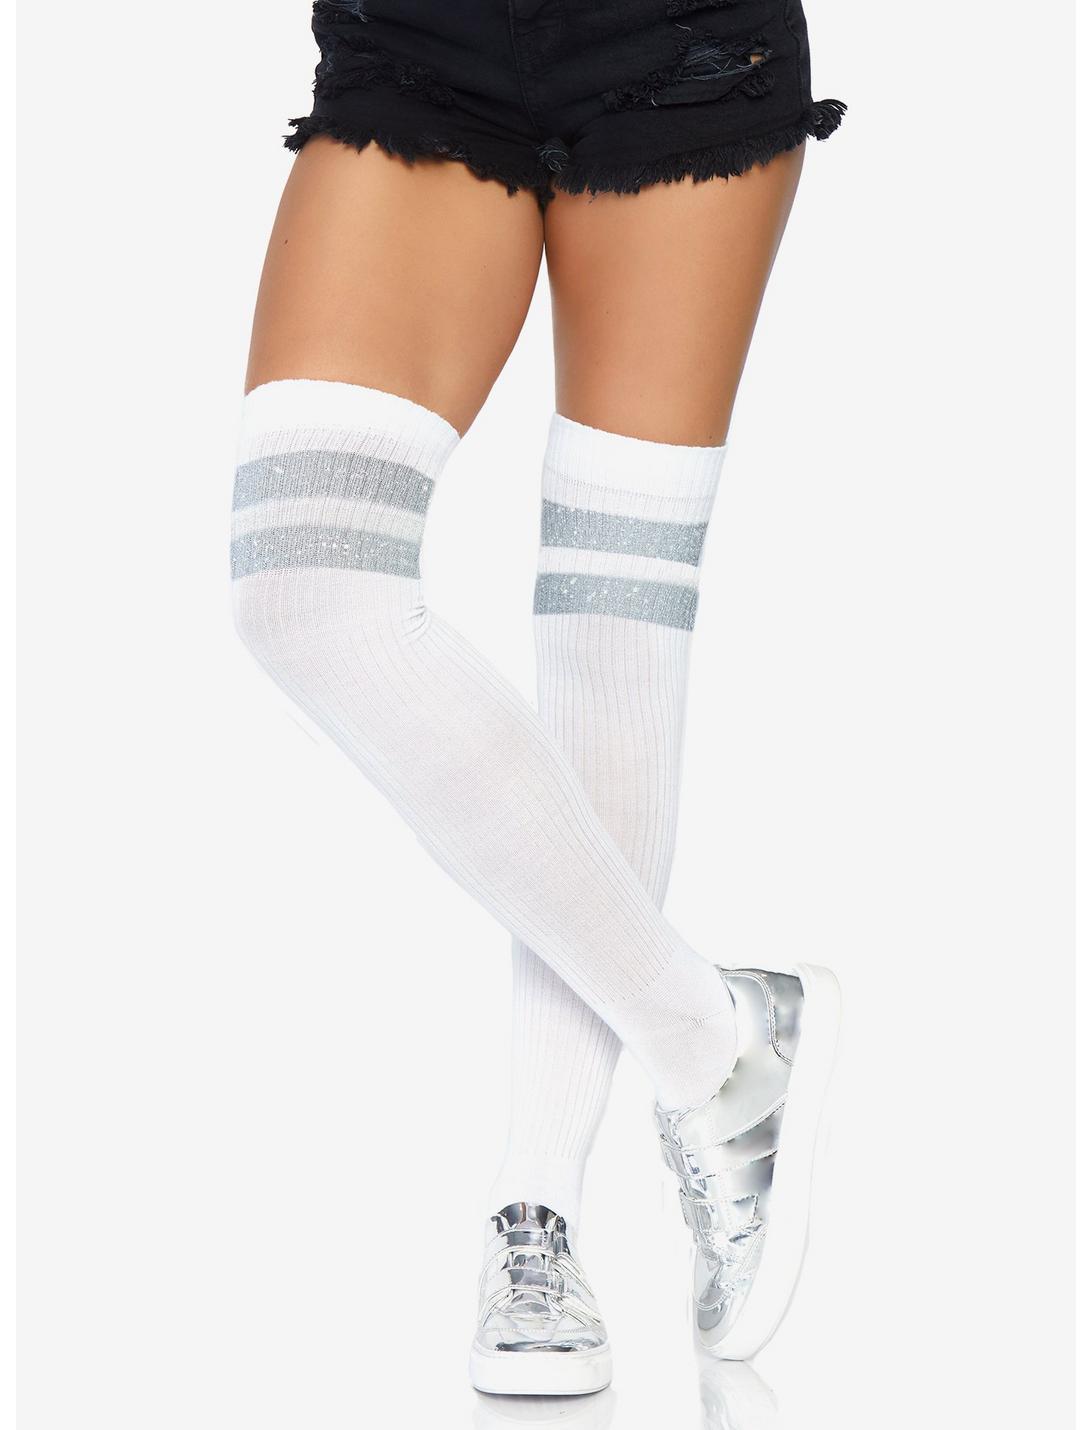 Athletic 2 Stripe Thigh Highs White/Silver, , hi-res